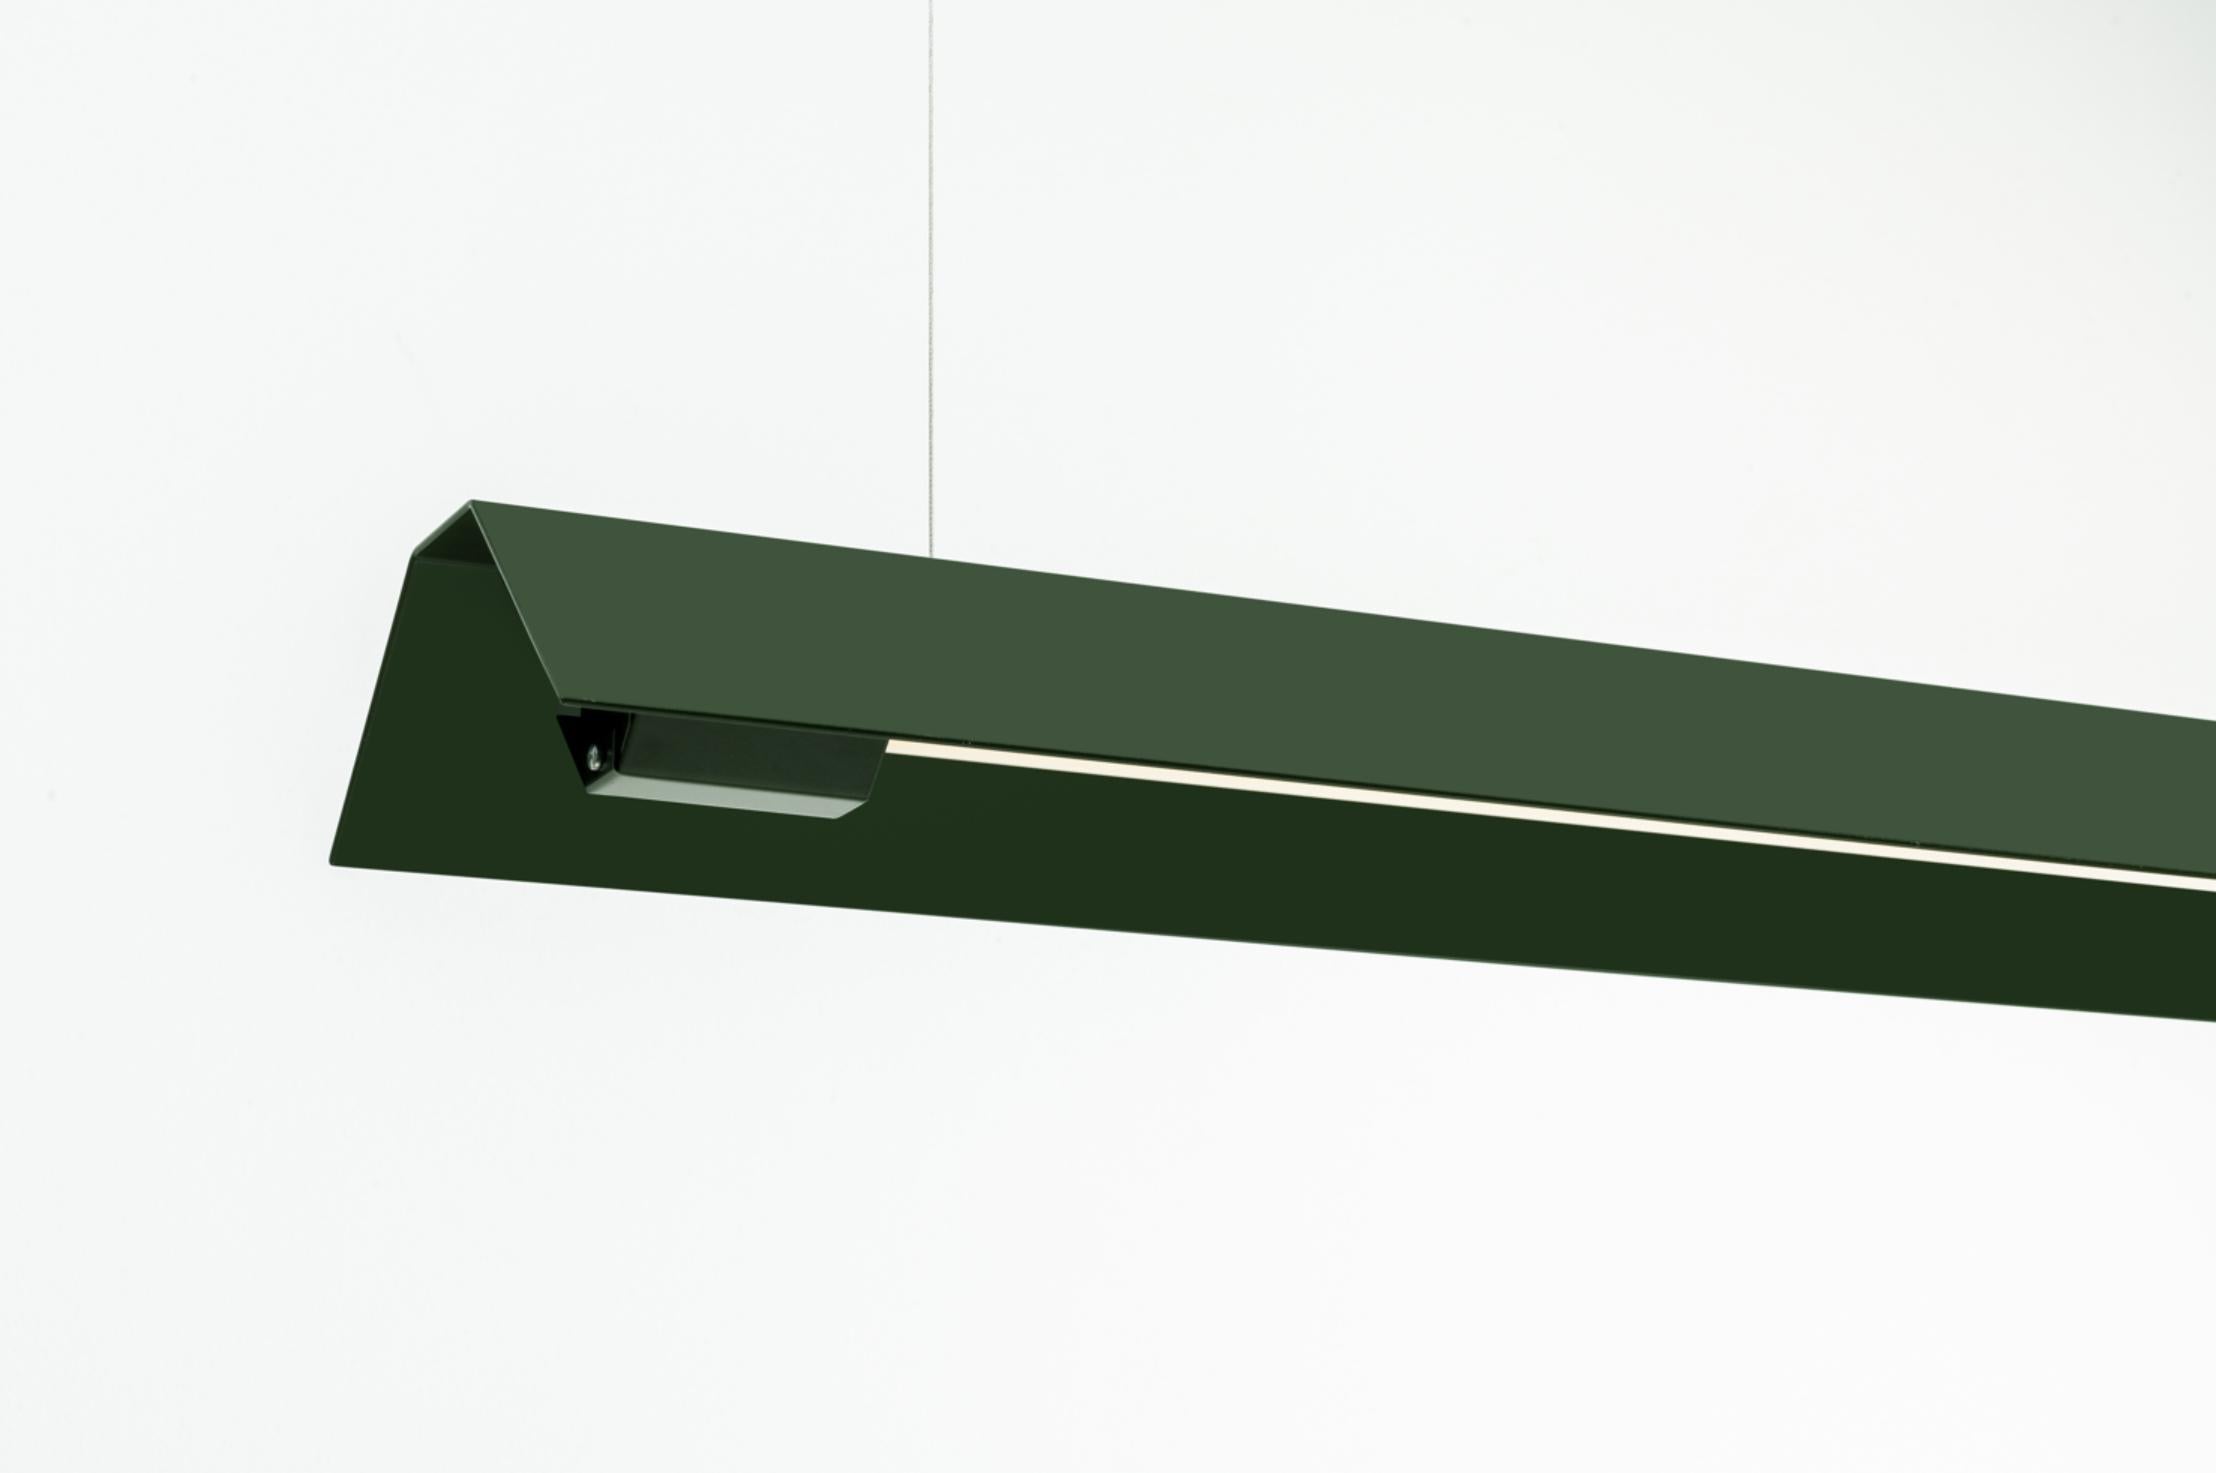 Medium Misalliance Ral bottle green suspended light by Lexavala
Dimensions: D 16 x W 100 x H 8 cm
Materials: powder coated aluminium.

There are two lenghts of socket covers, extending over the LED. Two short are to be found in Suspended and